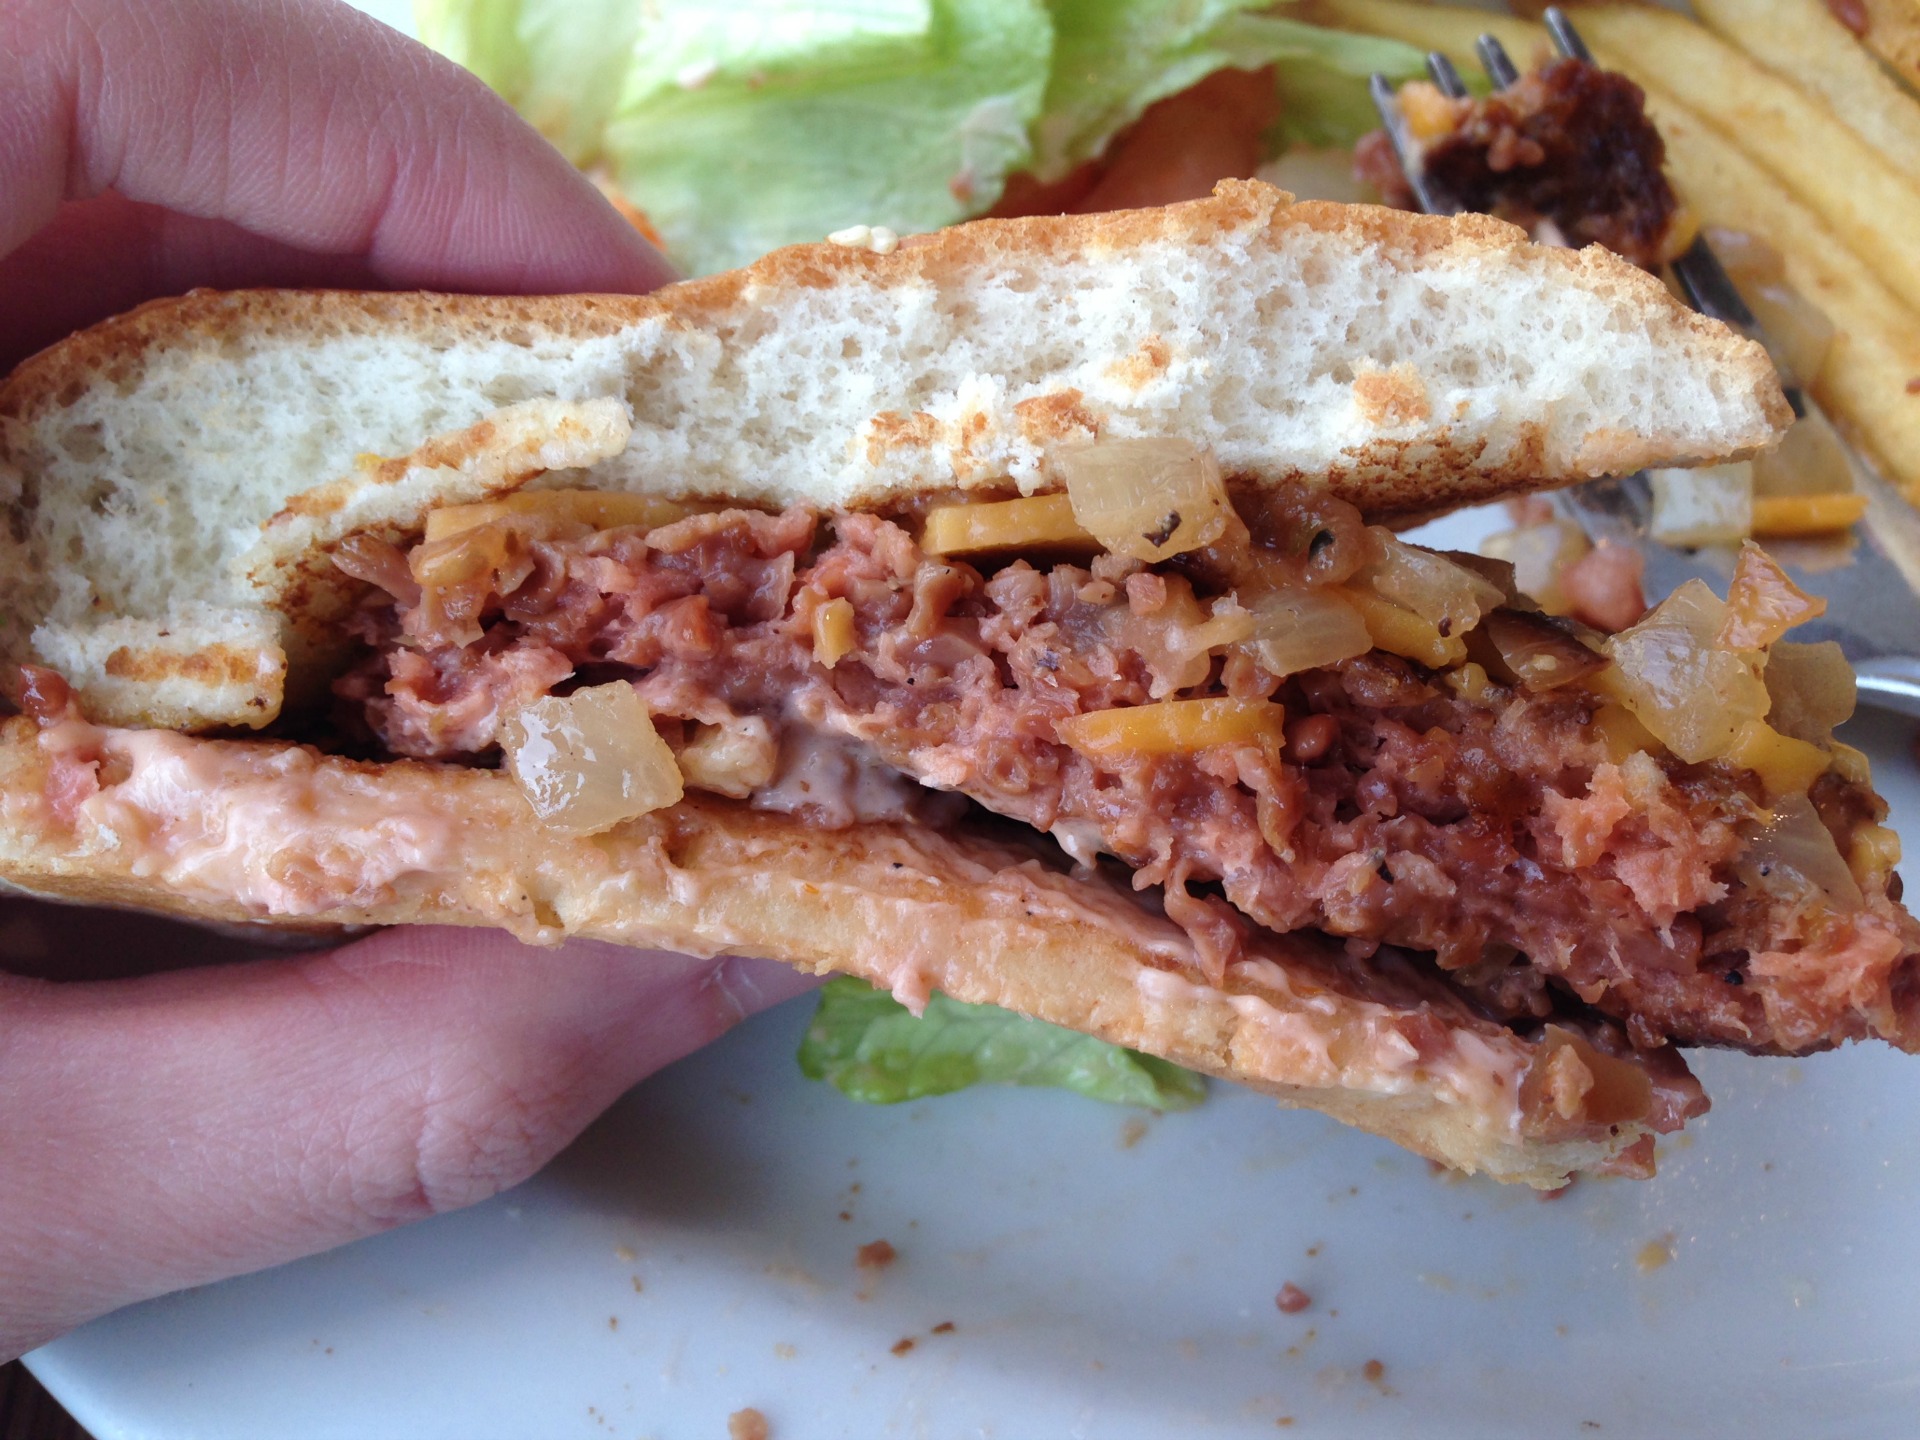 Despite claims, the Beyond Burger didn't bleed.